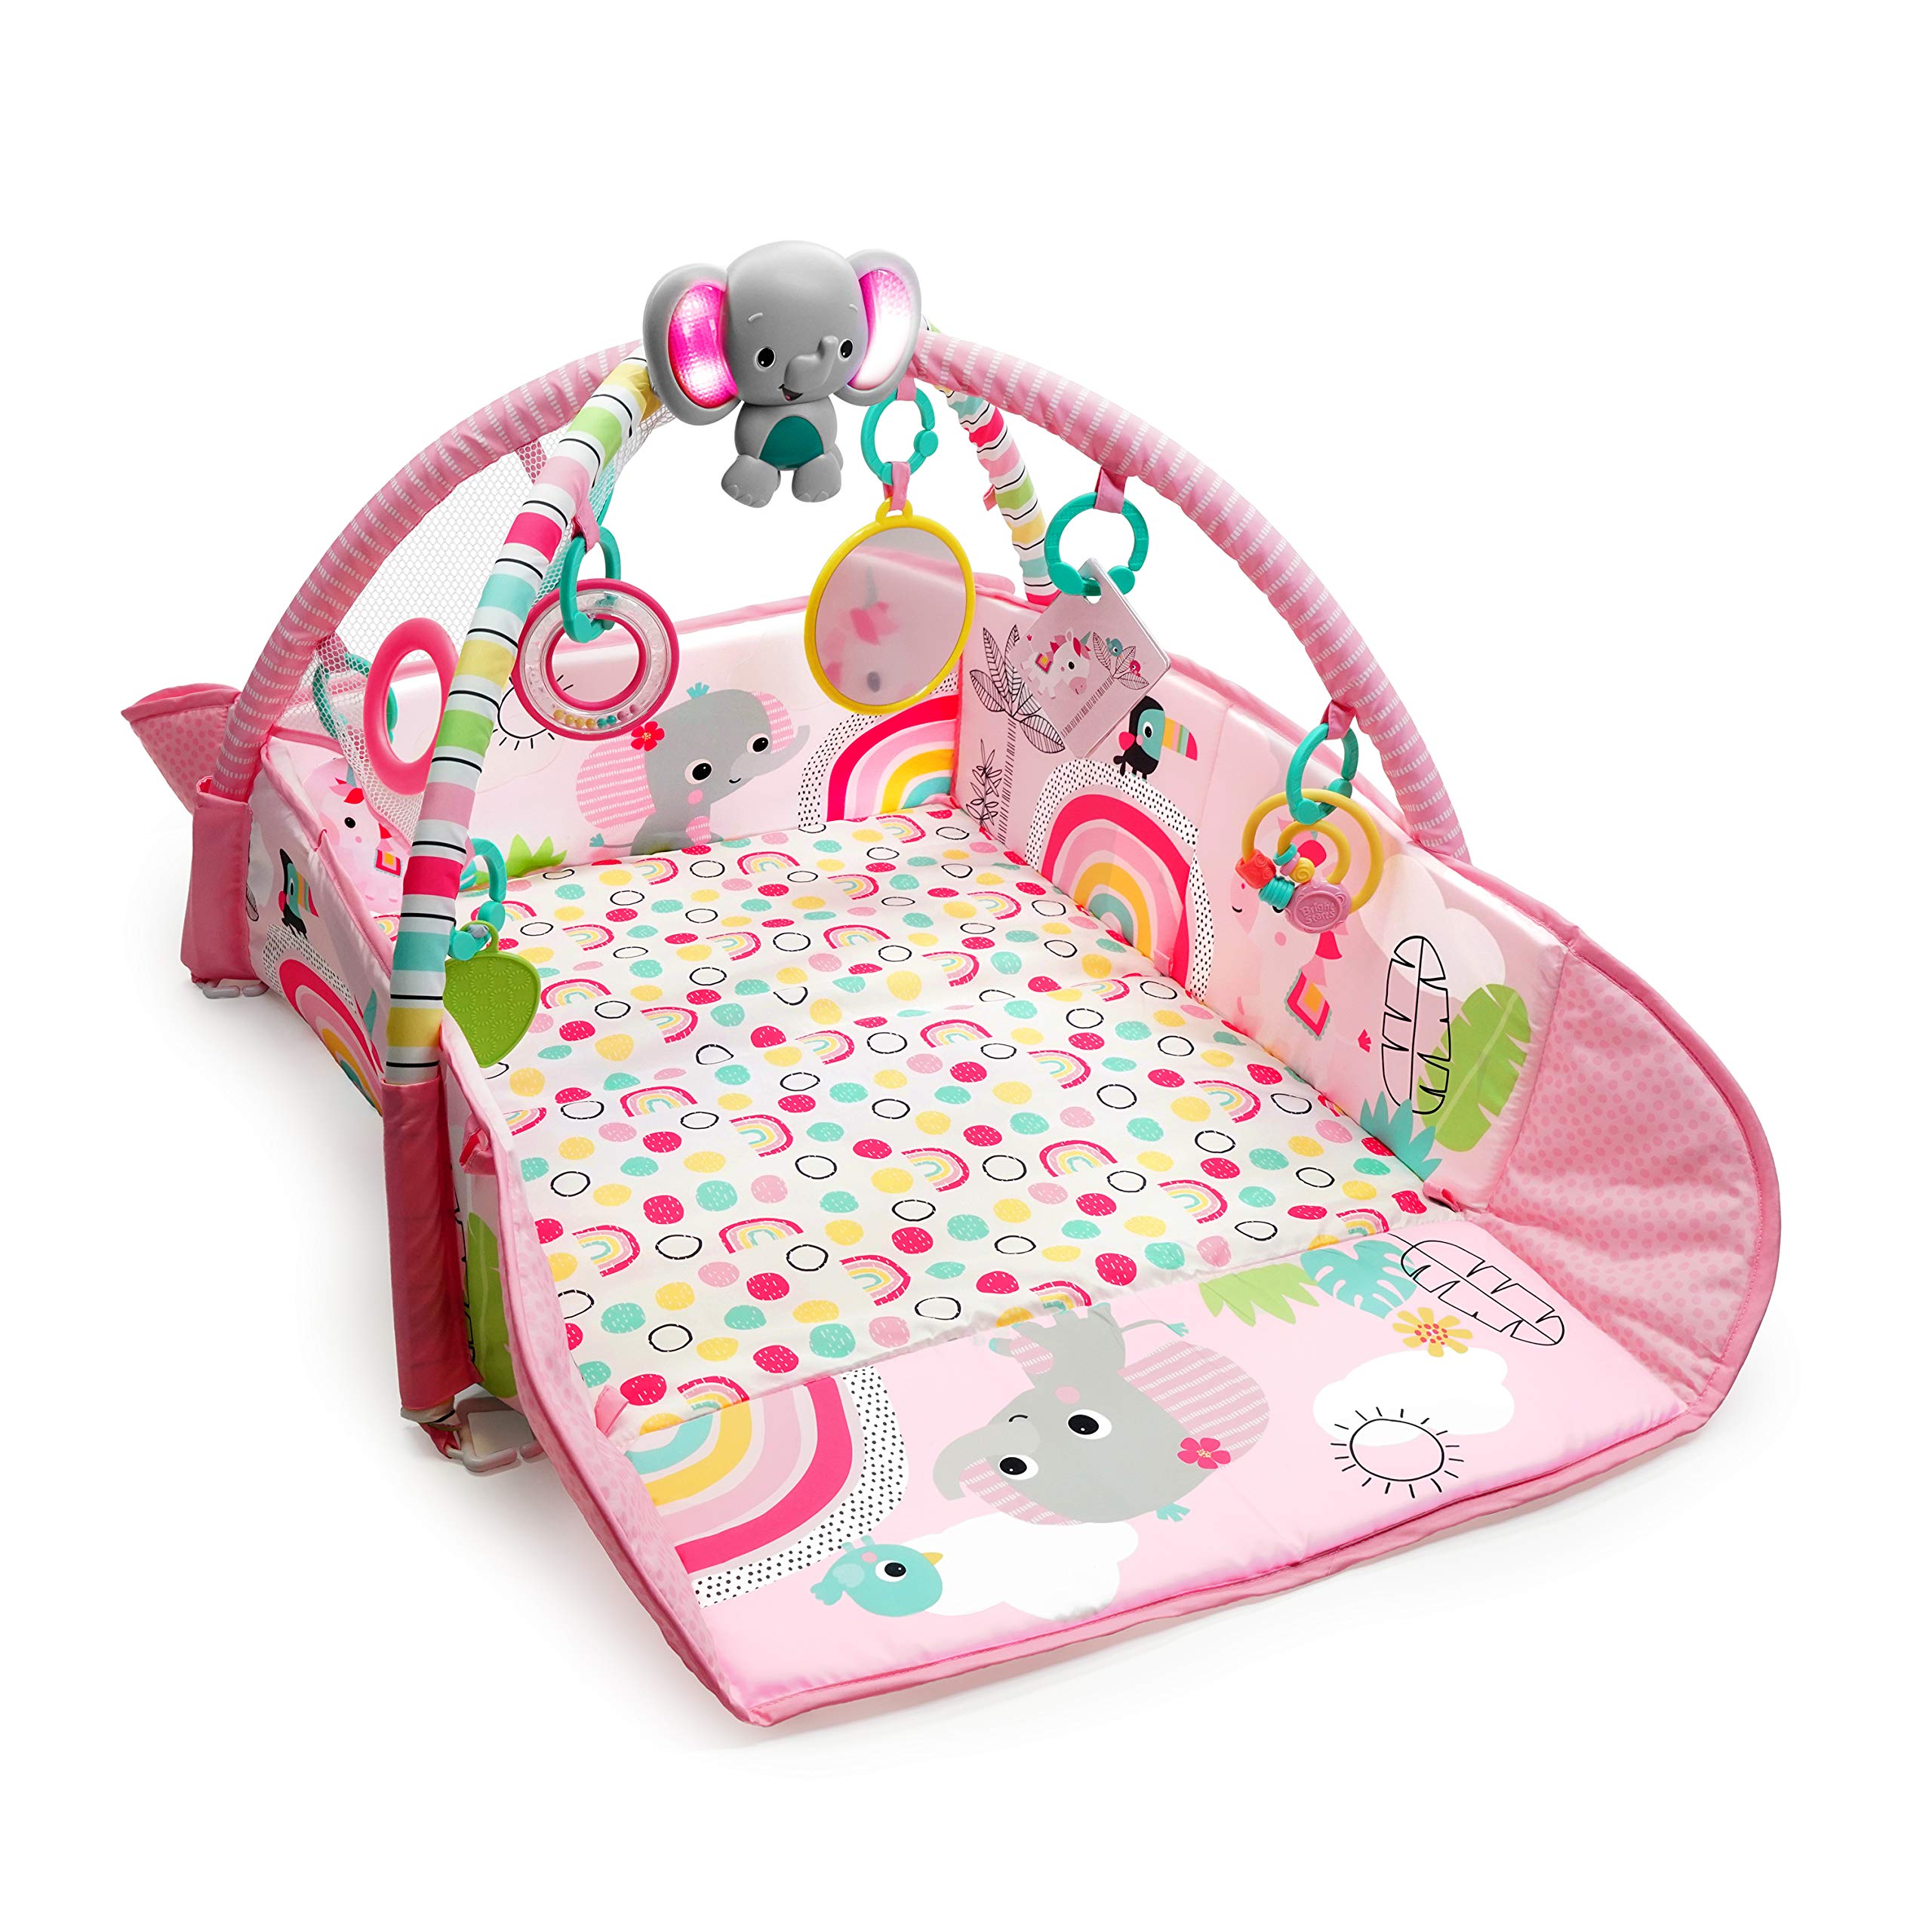 Bright Starts 5-in-1 Your Way Ball Play Baby Activity Play Gym & Ball Pit, includes 7 toys, Newborn to Toddler - Rainbow Tropics (Pink)